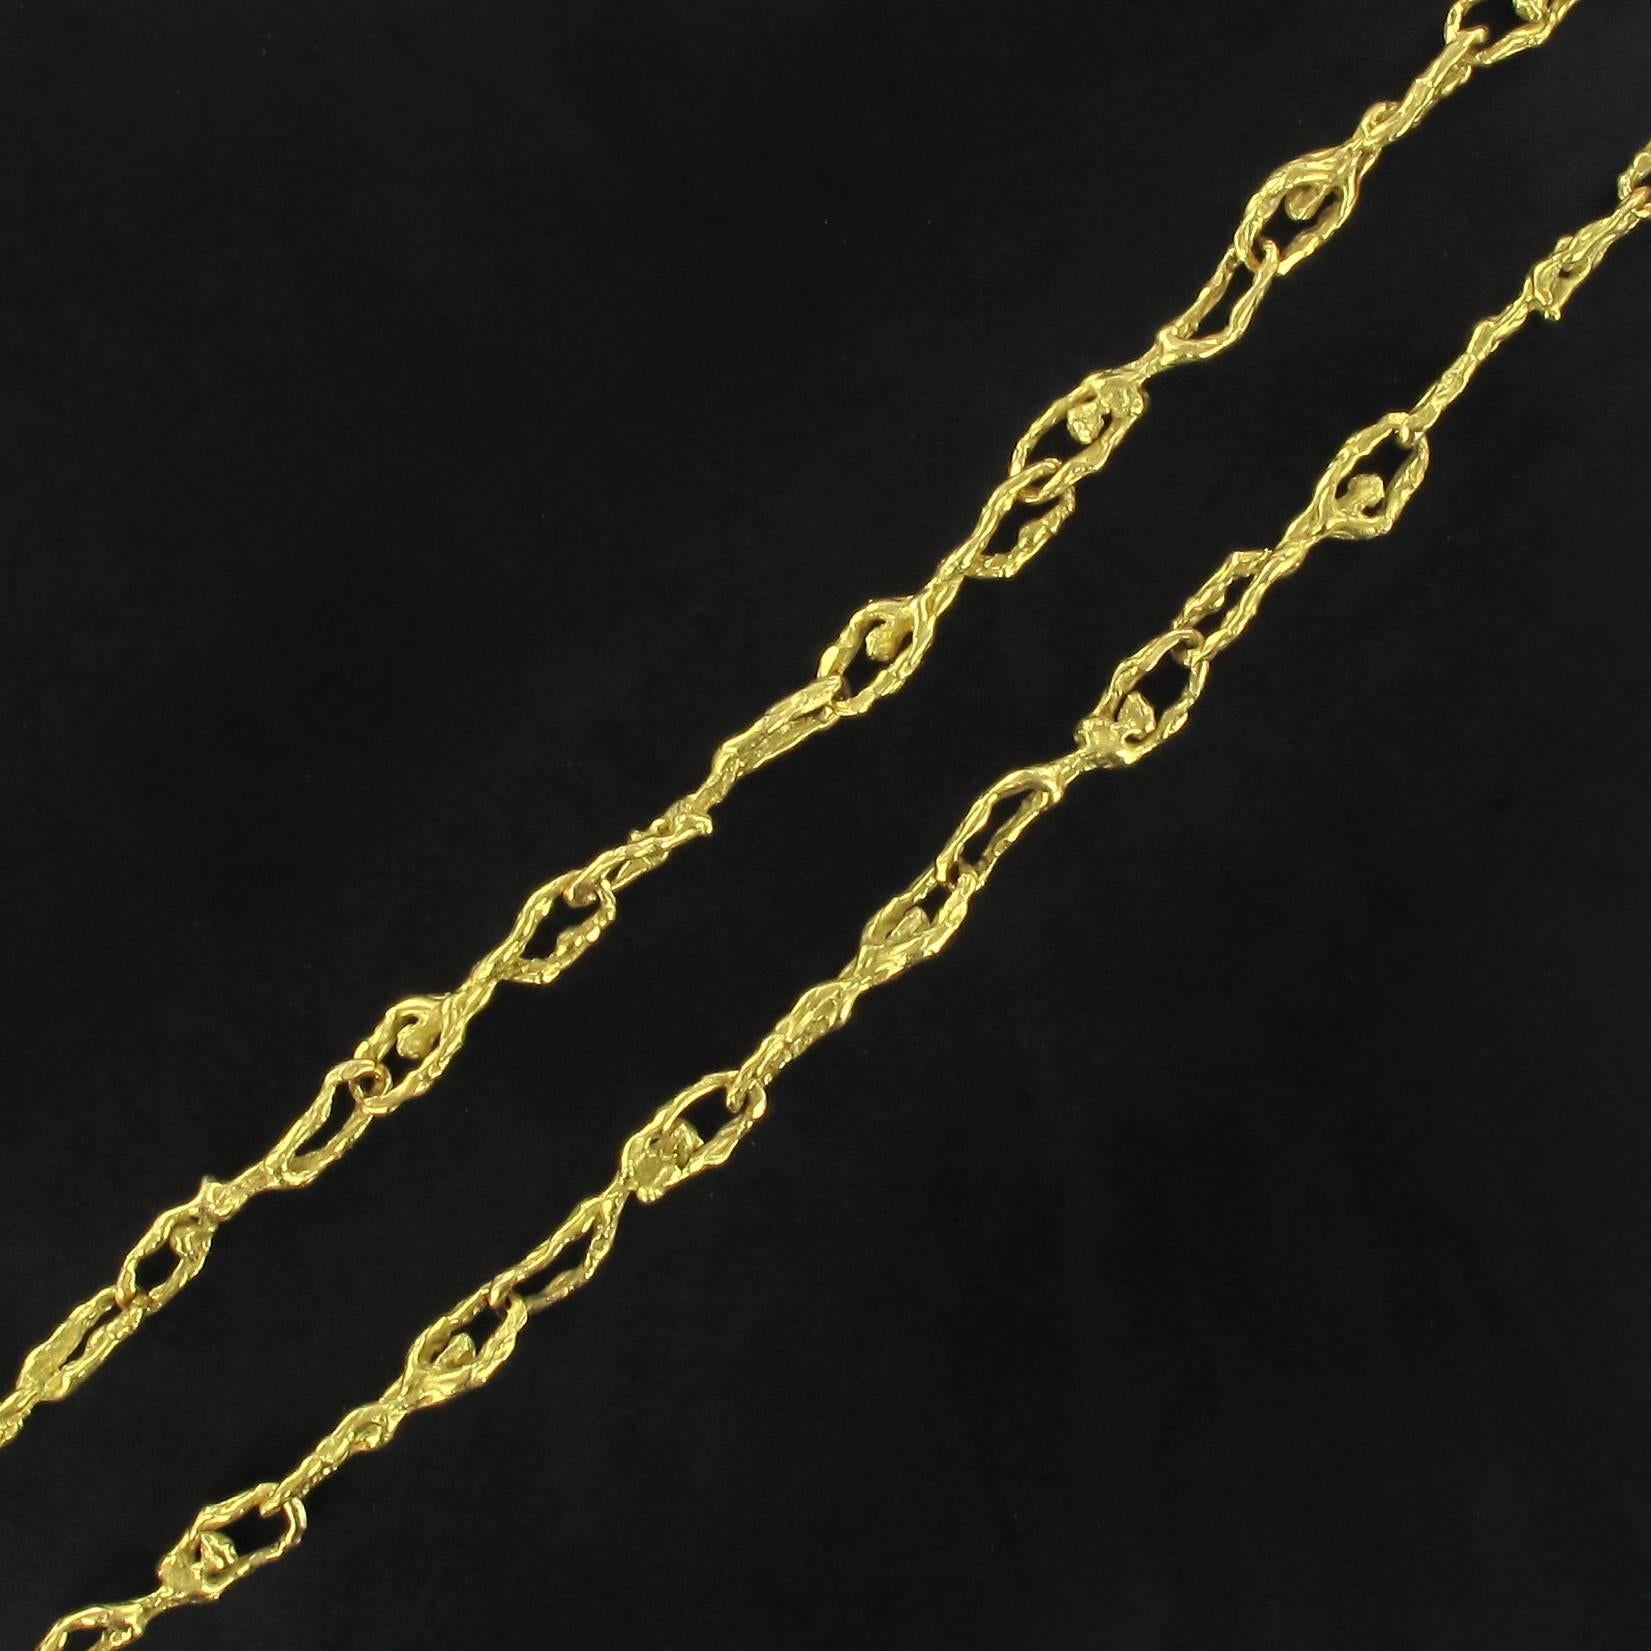 Modernist Gold Necklace with Character Motifs